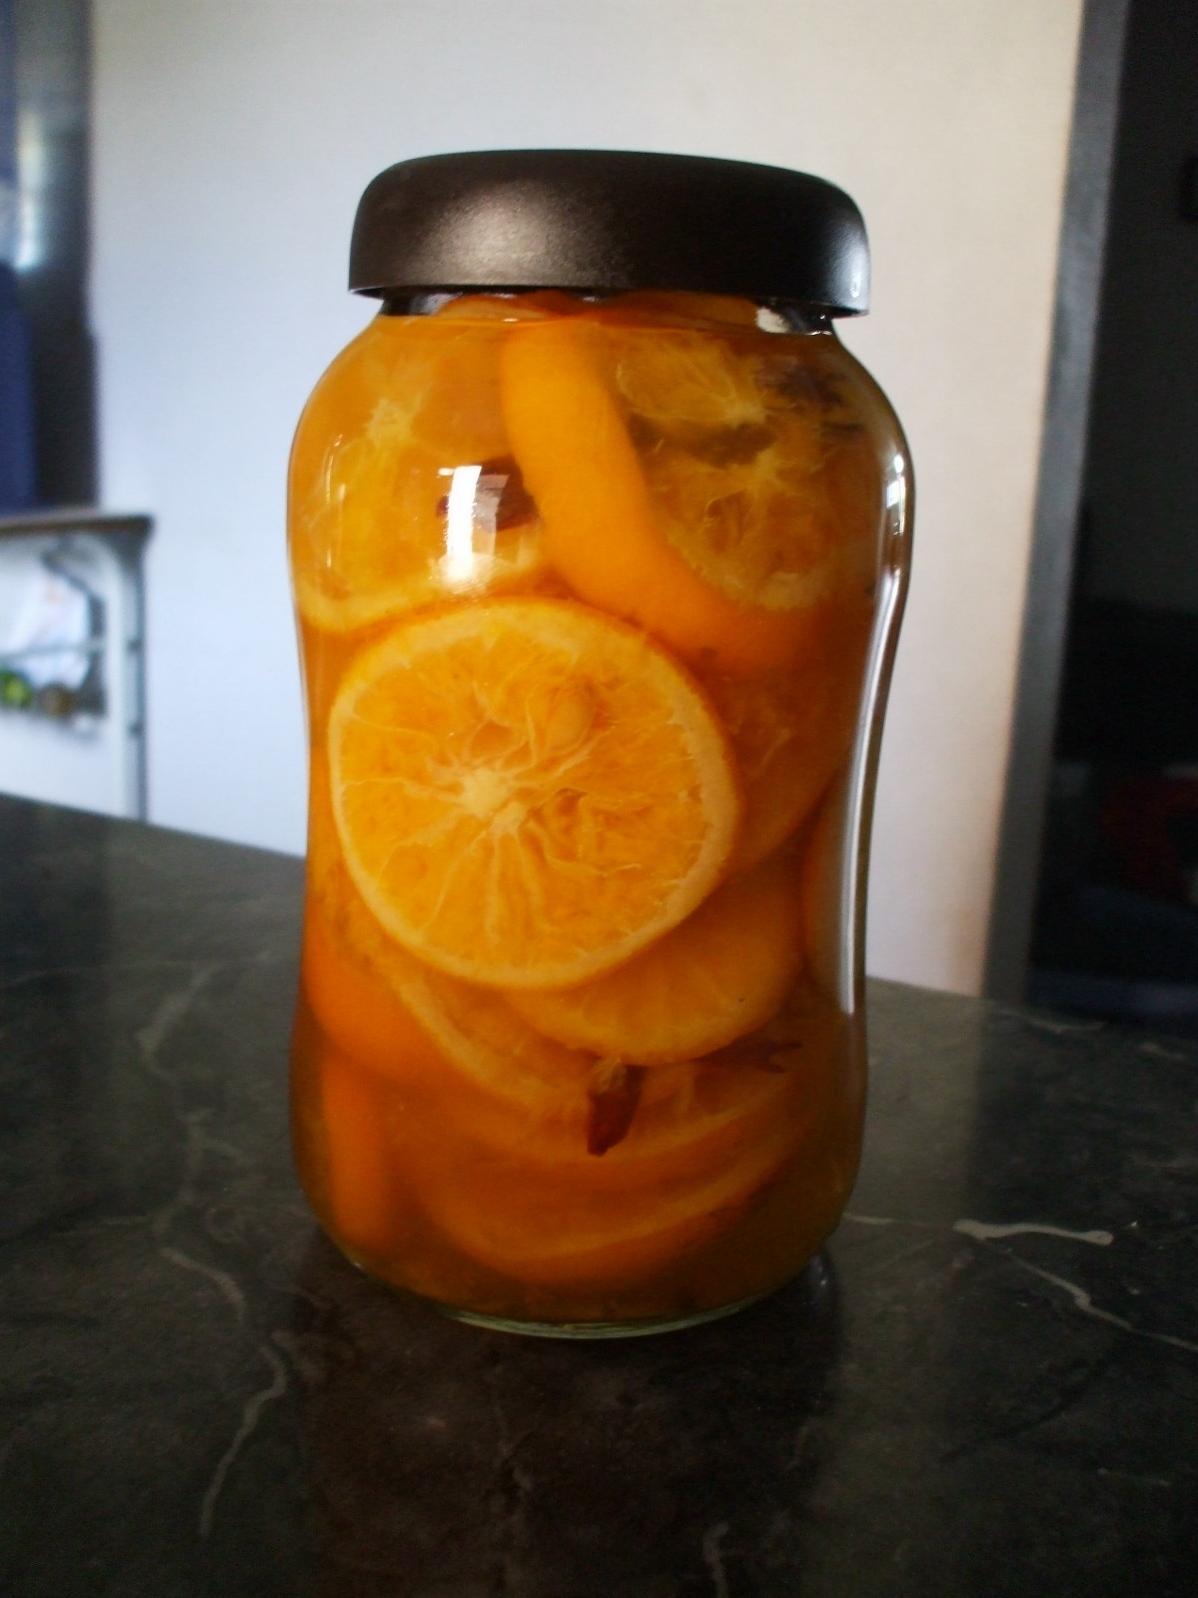  Mouth-watering preserved oranges straight from the sunny south!